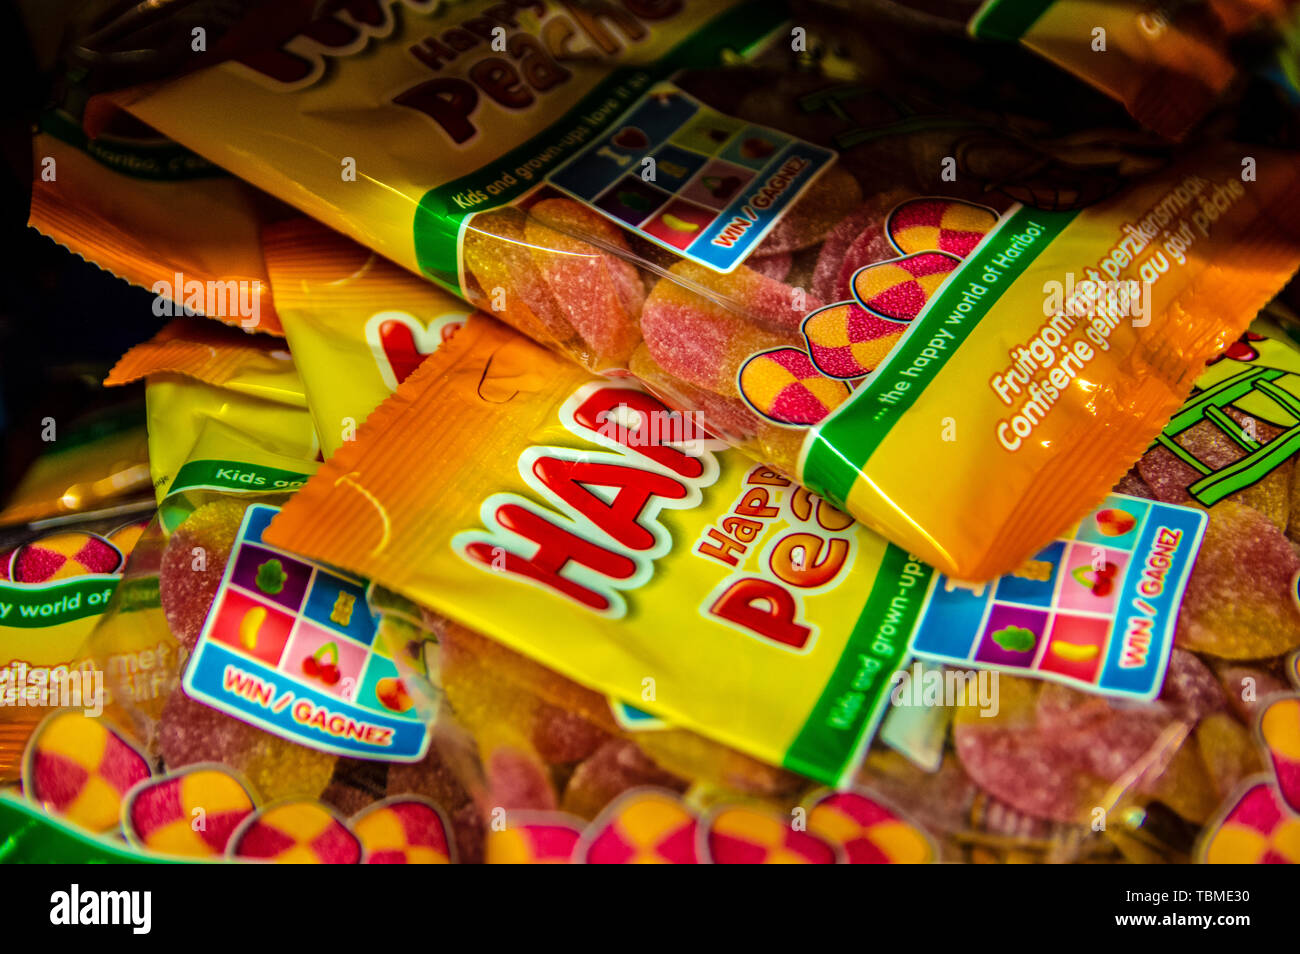 Close Up Haribo Candy Bags At Amsterdam The Netherlands 2019 Stock Photo